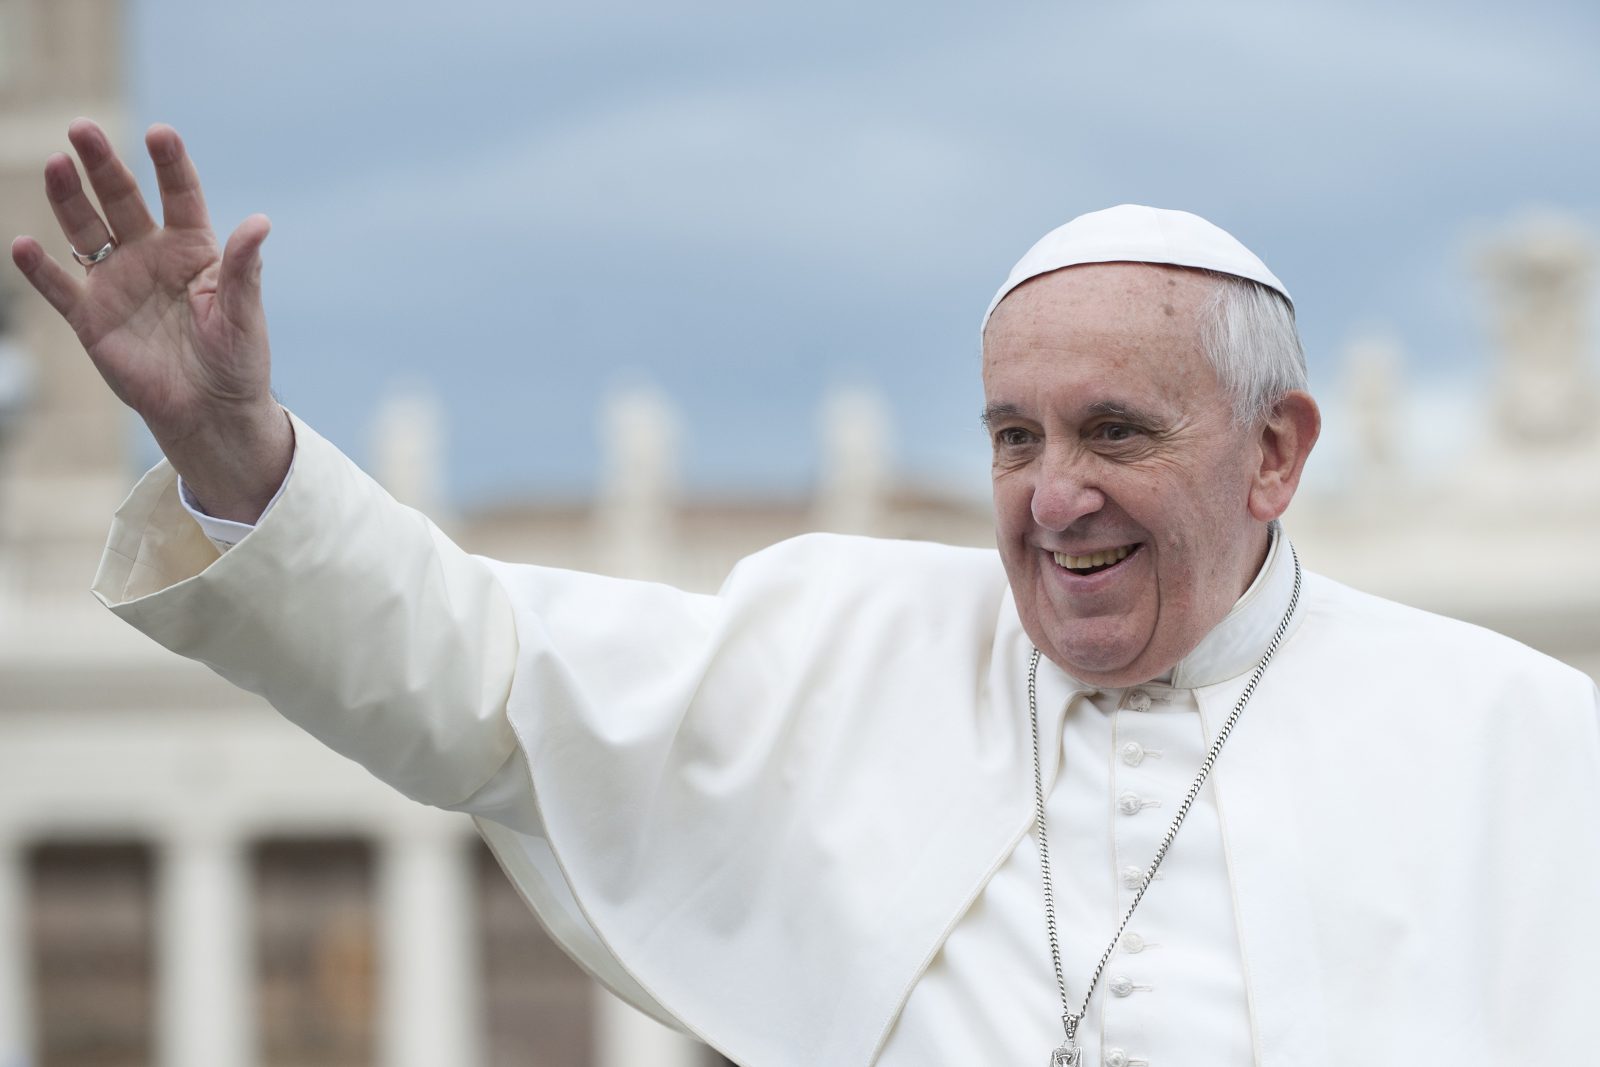 OCSTA on Pope Francis’ Visit